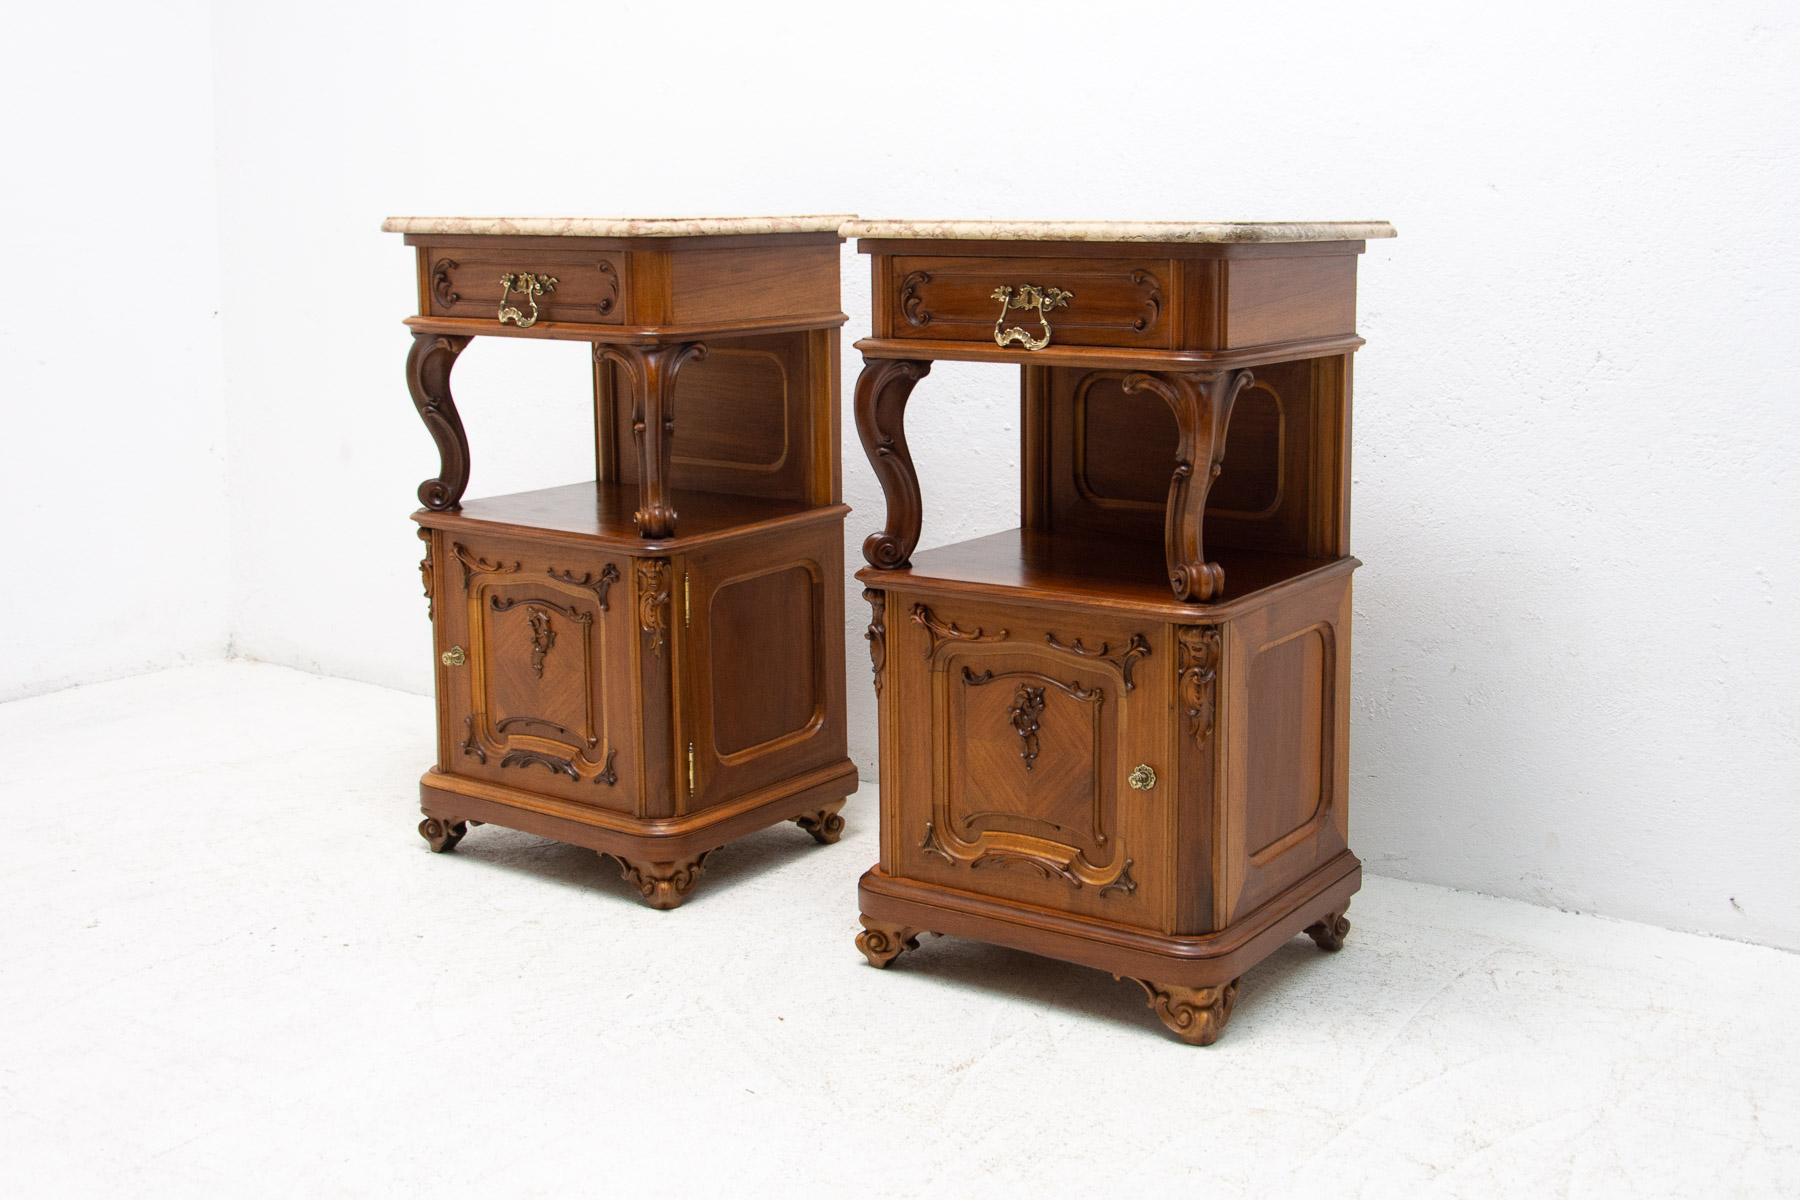 20th Century Pair of Fully Restored Historicist Bedside Tables, 1910, Austria For Sale